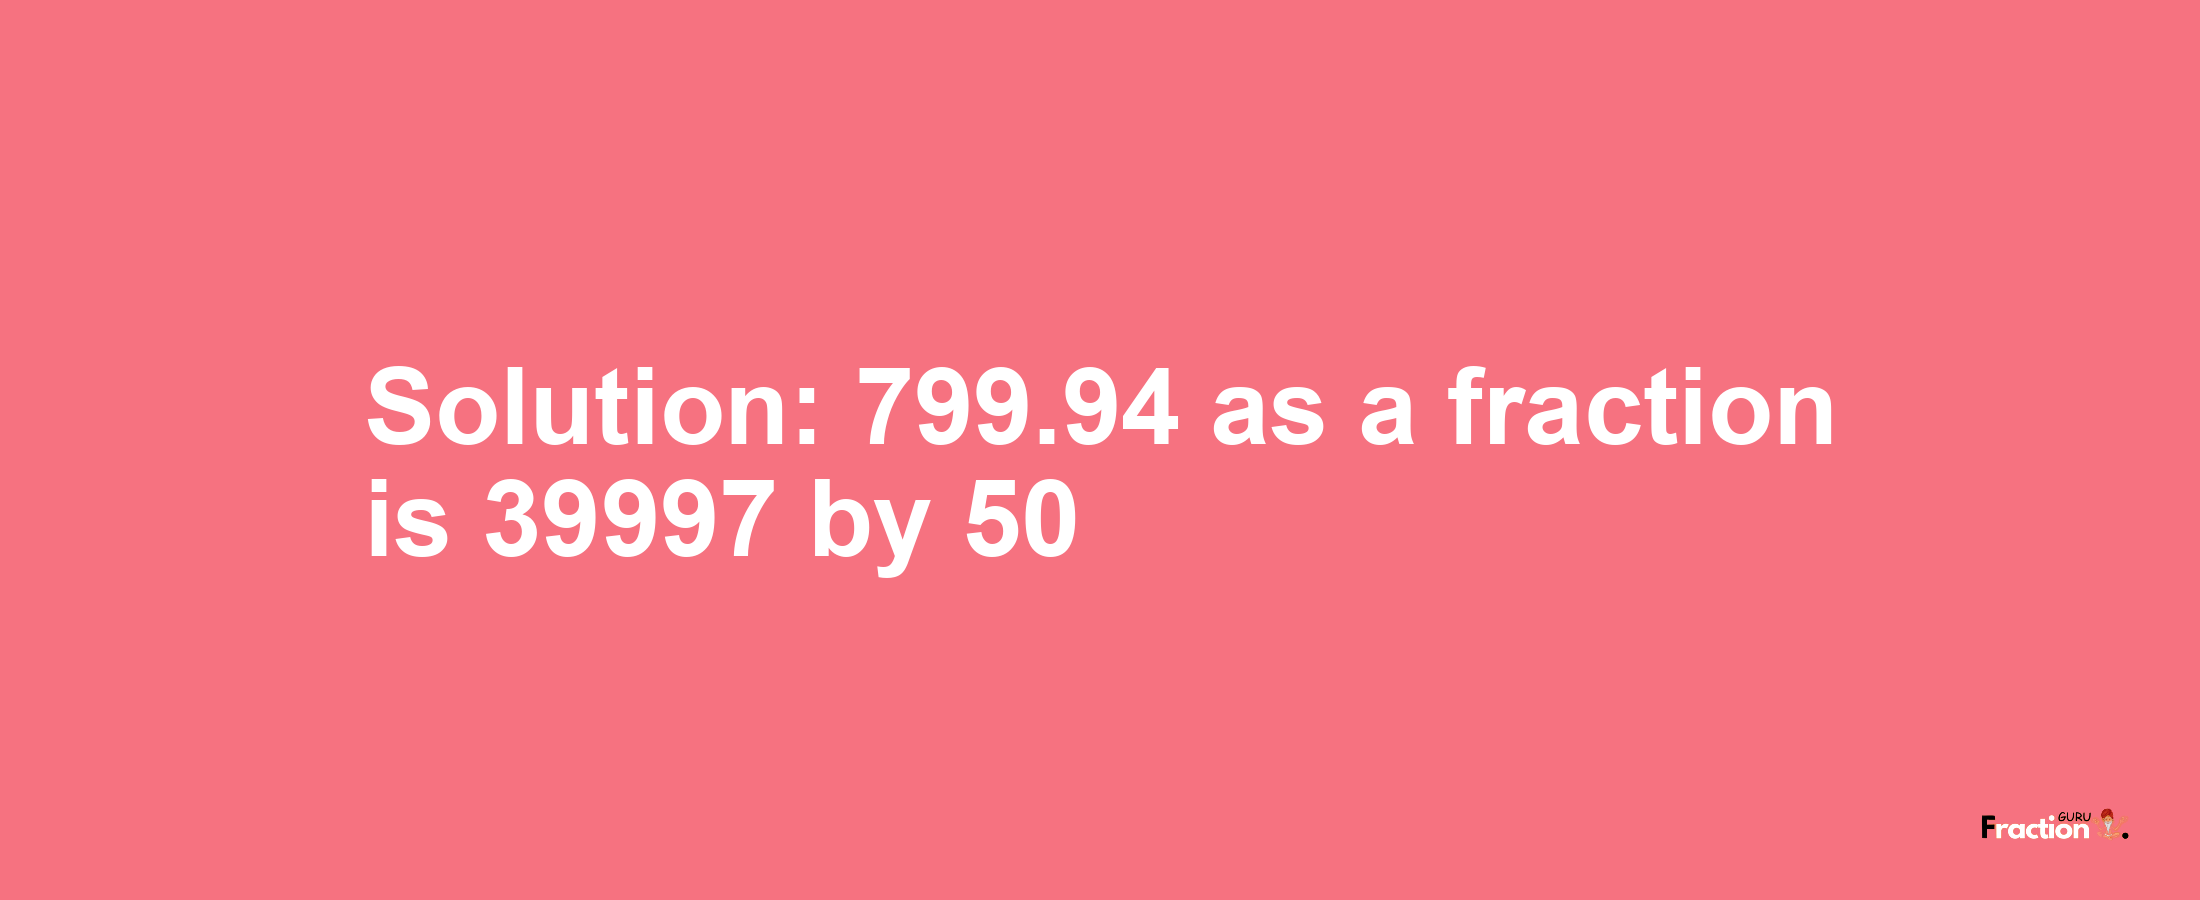 Solution:799.94 as a fraction is 39997/50